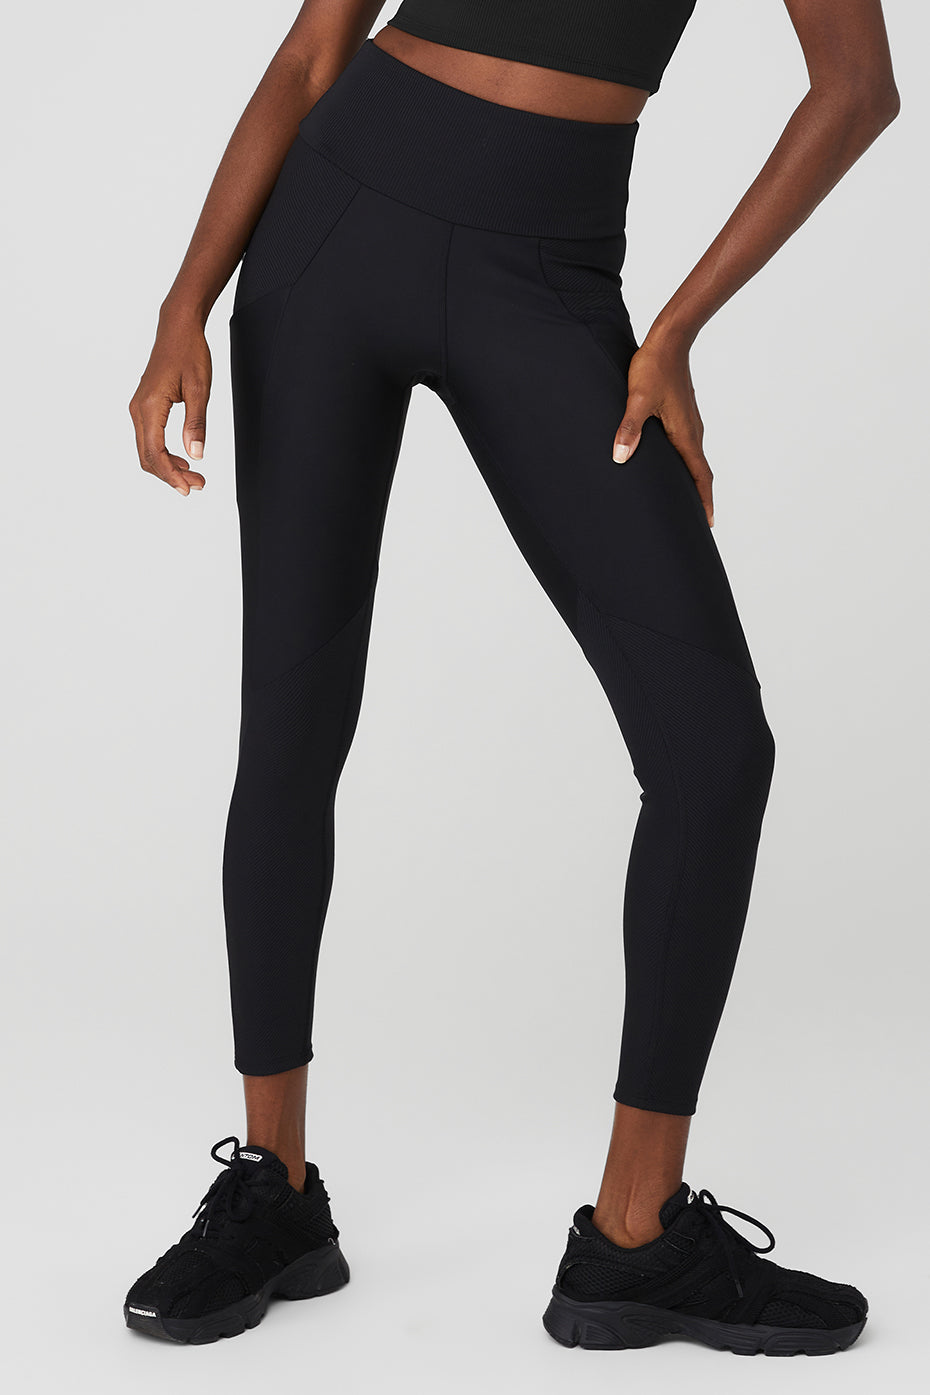 Alo Yoga Airlift High Waisted 7/8 Corset Leggings Espresso Size XS - $87 -  From The